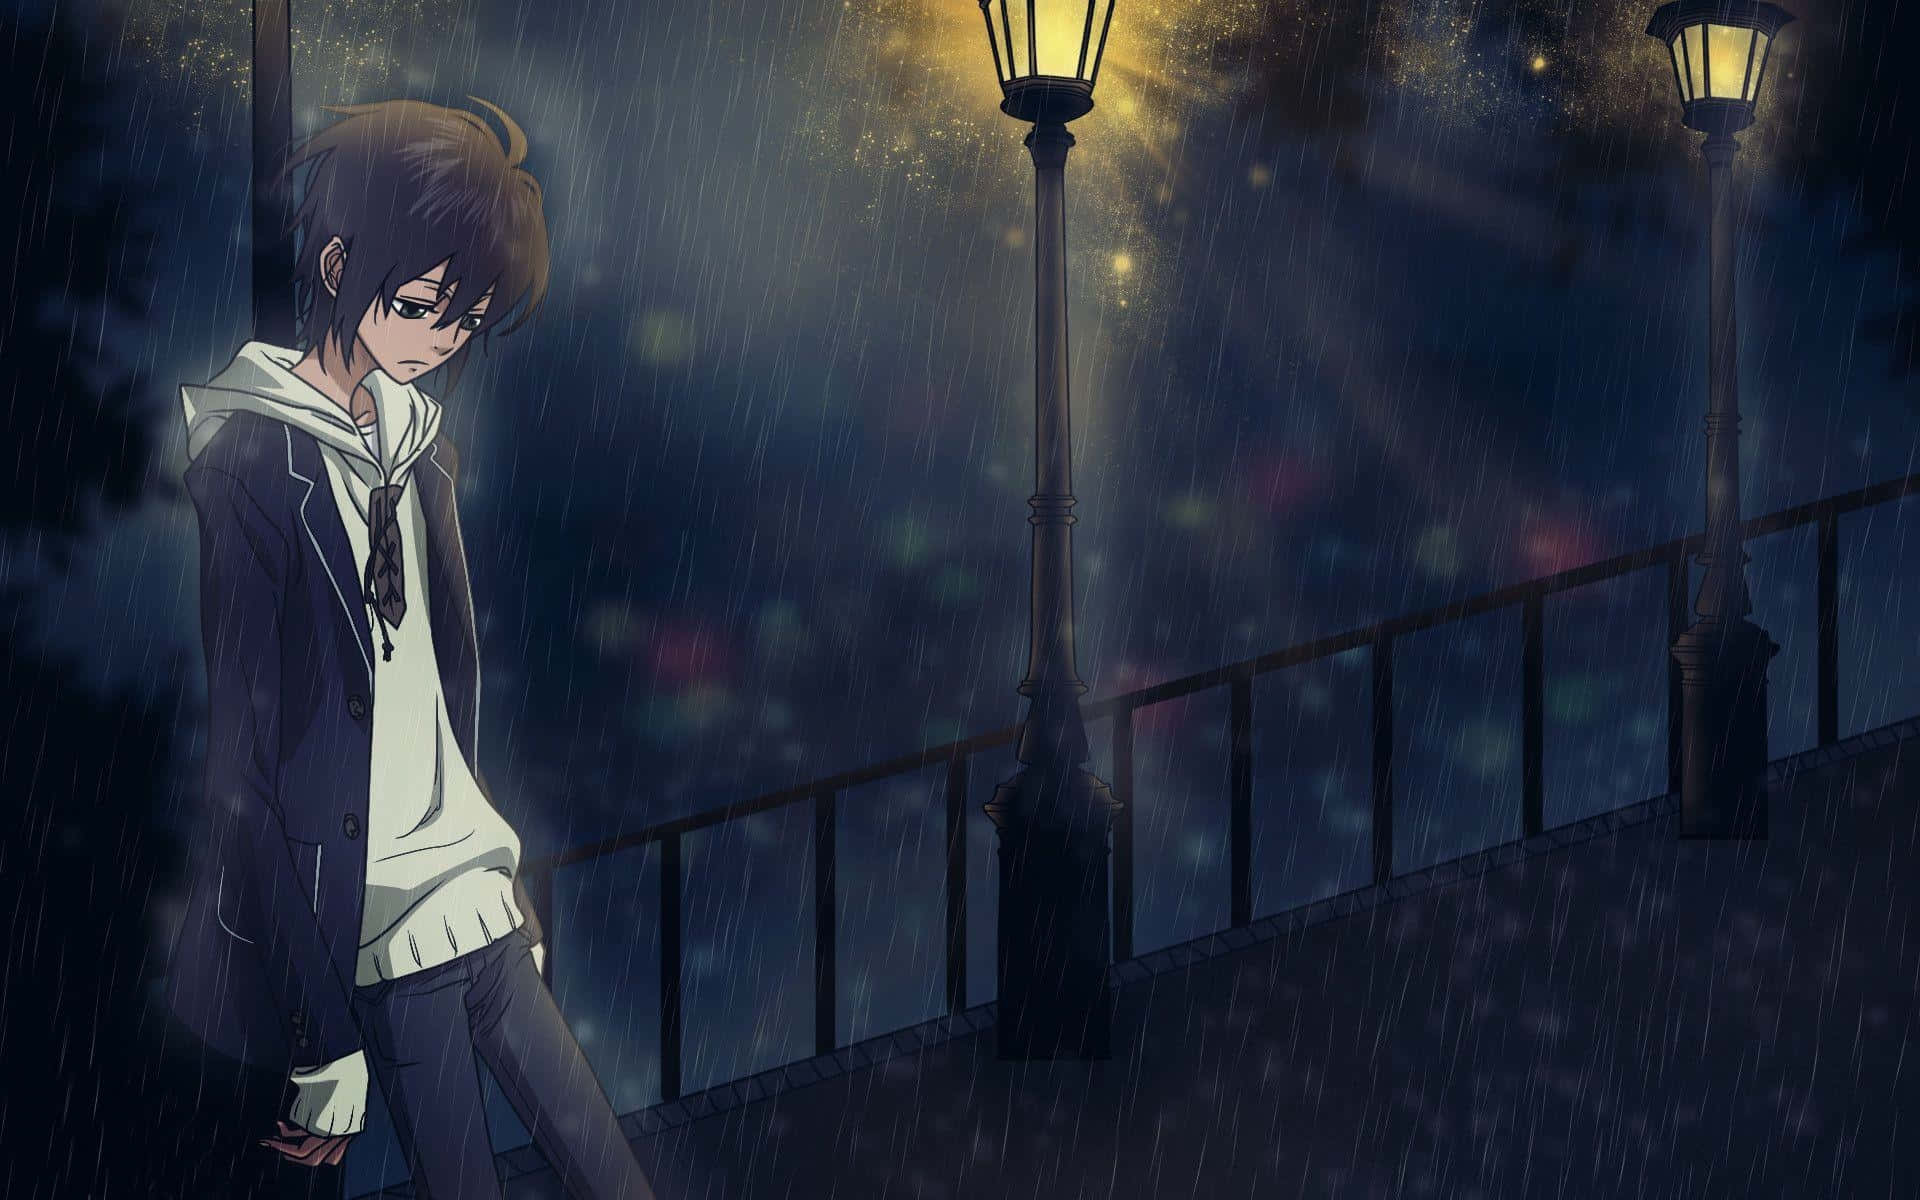 A lonely Depressed Anime Boy Wallpaper